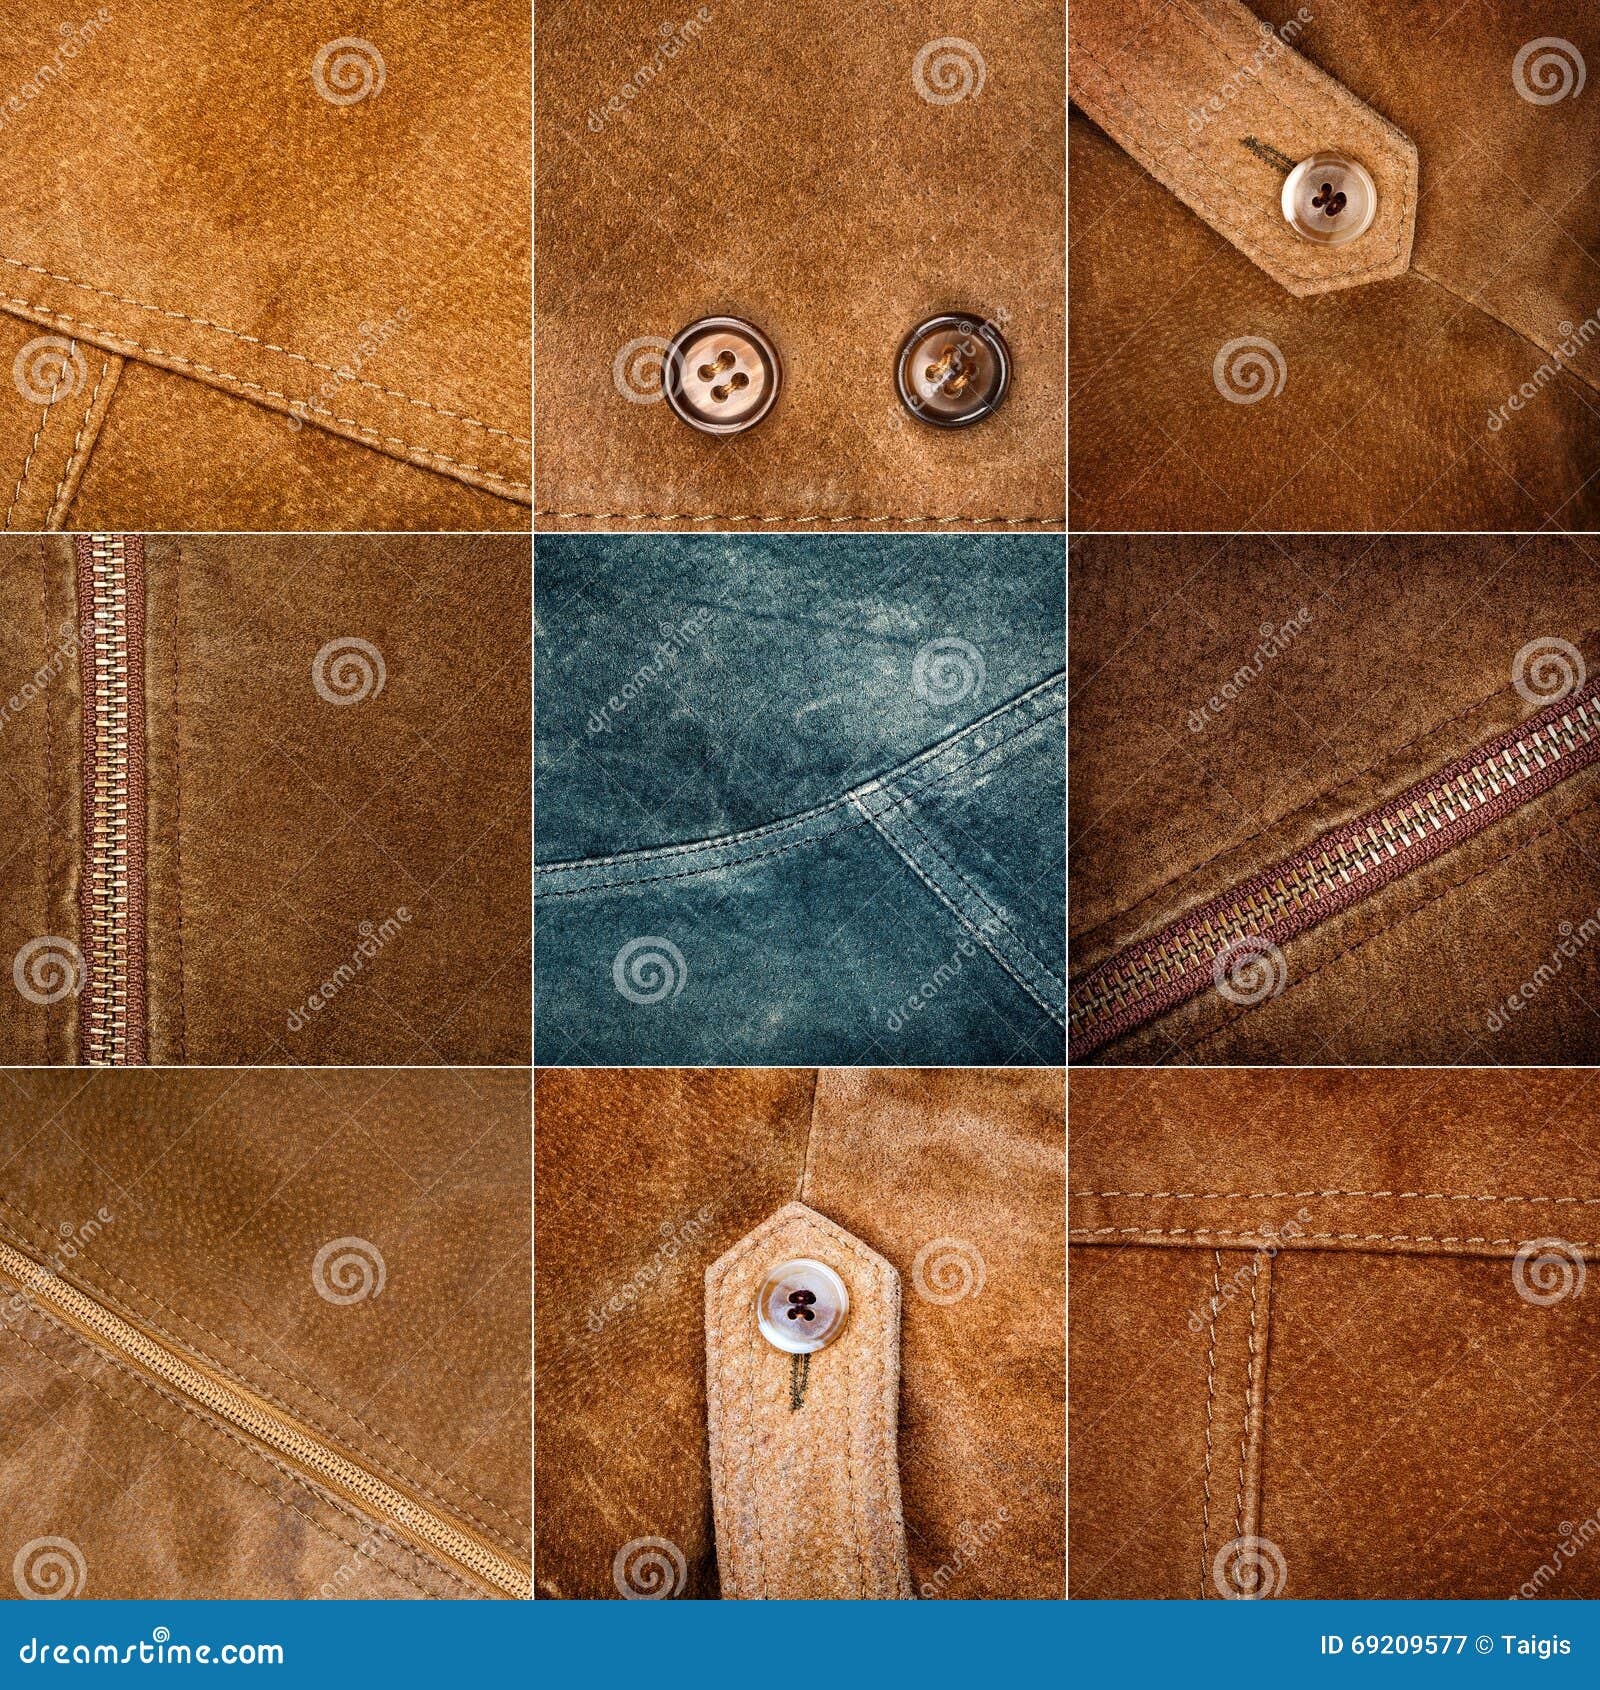 Collection of Various Suede Textures Stock Image - Image of bumpy ...